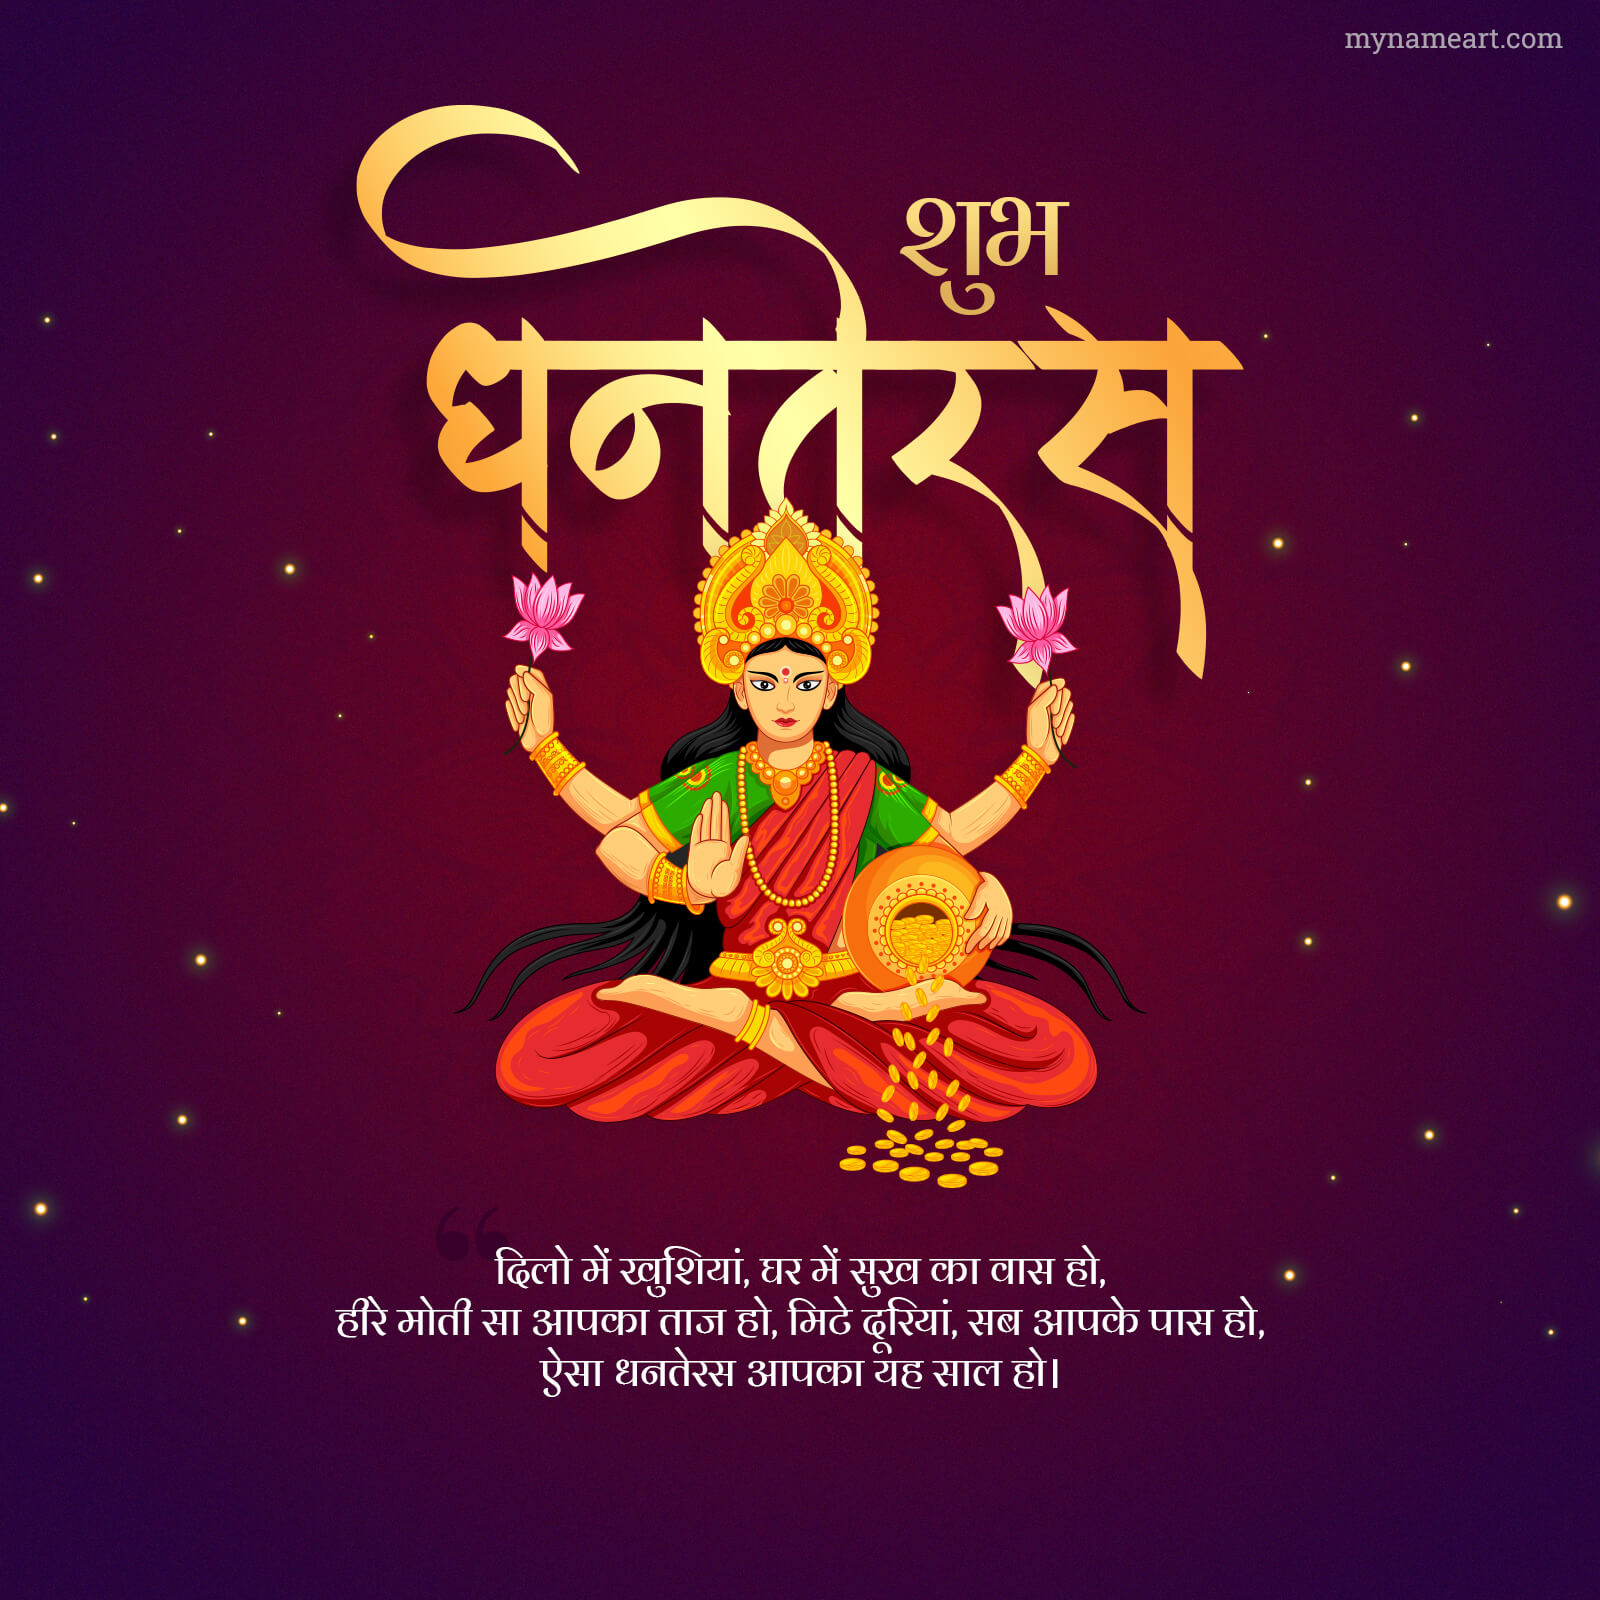 Happy Dhanteras Wishes Quotes Message In Hindi And English Winkly Hot Sex Picture 6809